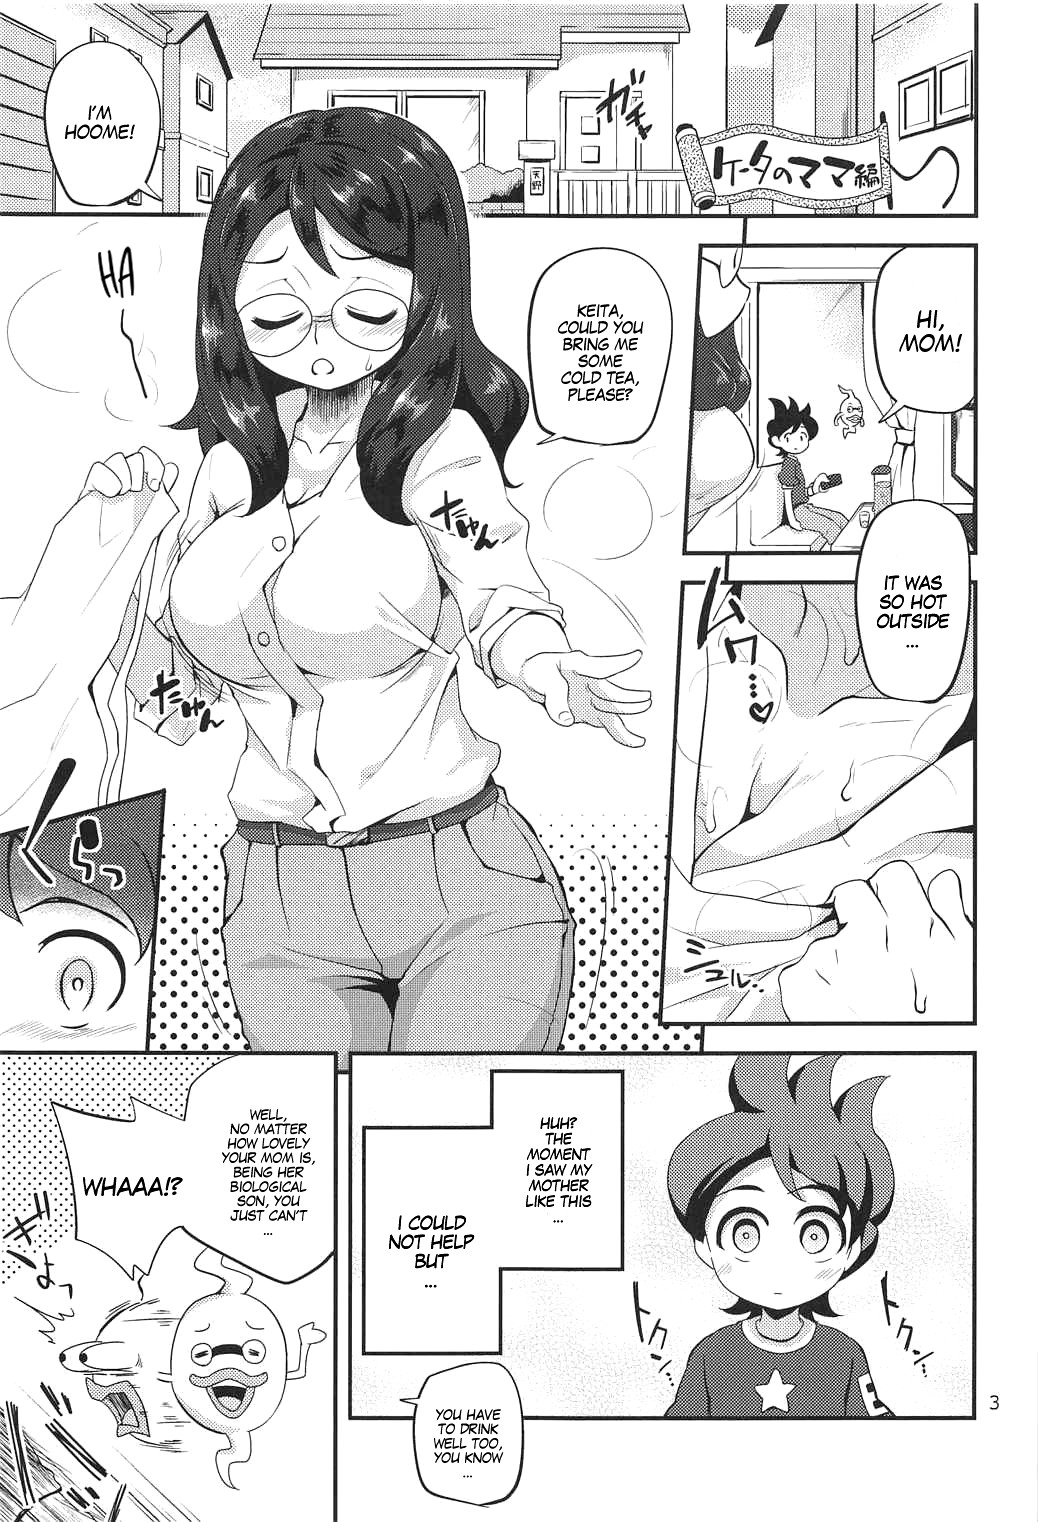 Hentai Manga Comic-It's Some Married Mother on Son and Solo Girl action-nyan!-Read-2